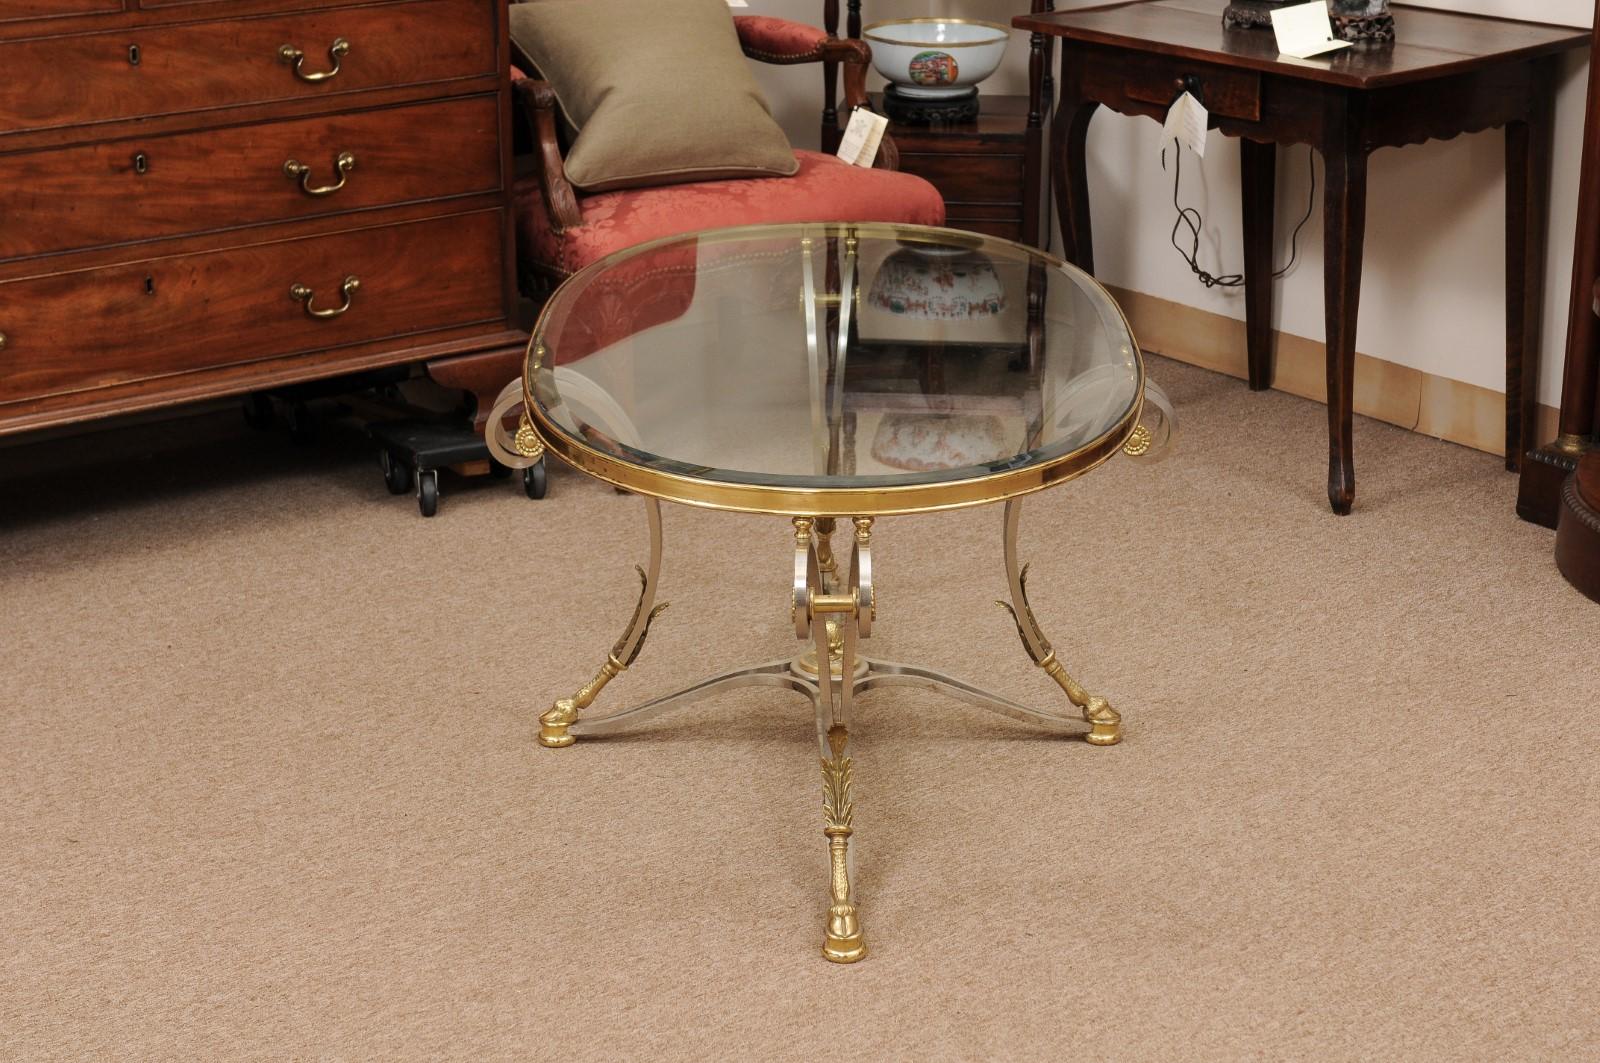 Oval French Steel & Brass Coffee Table with Glass Top, Hoof Feet & Acorn Detail 1